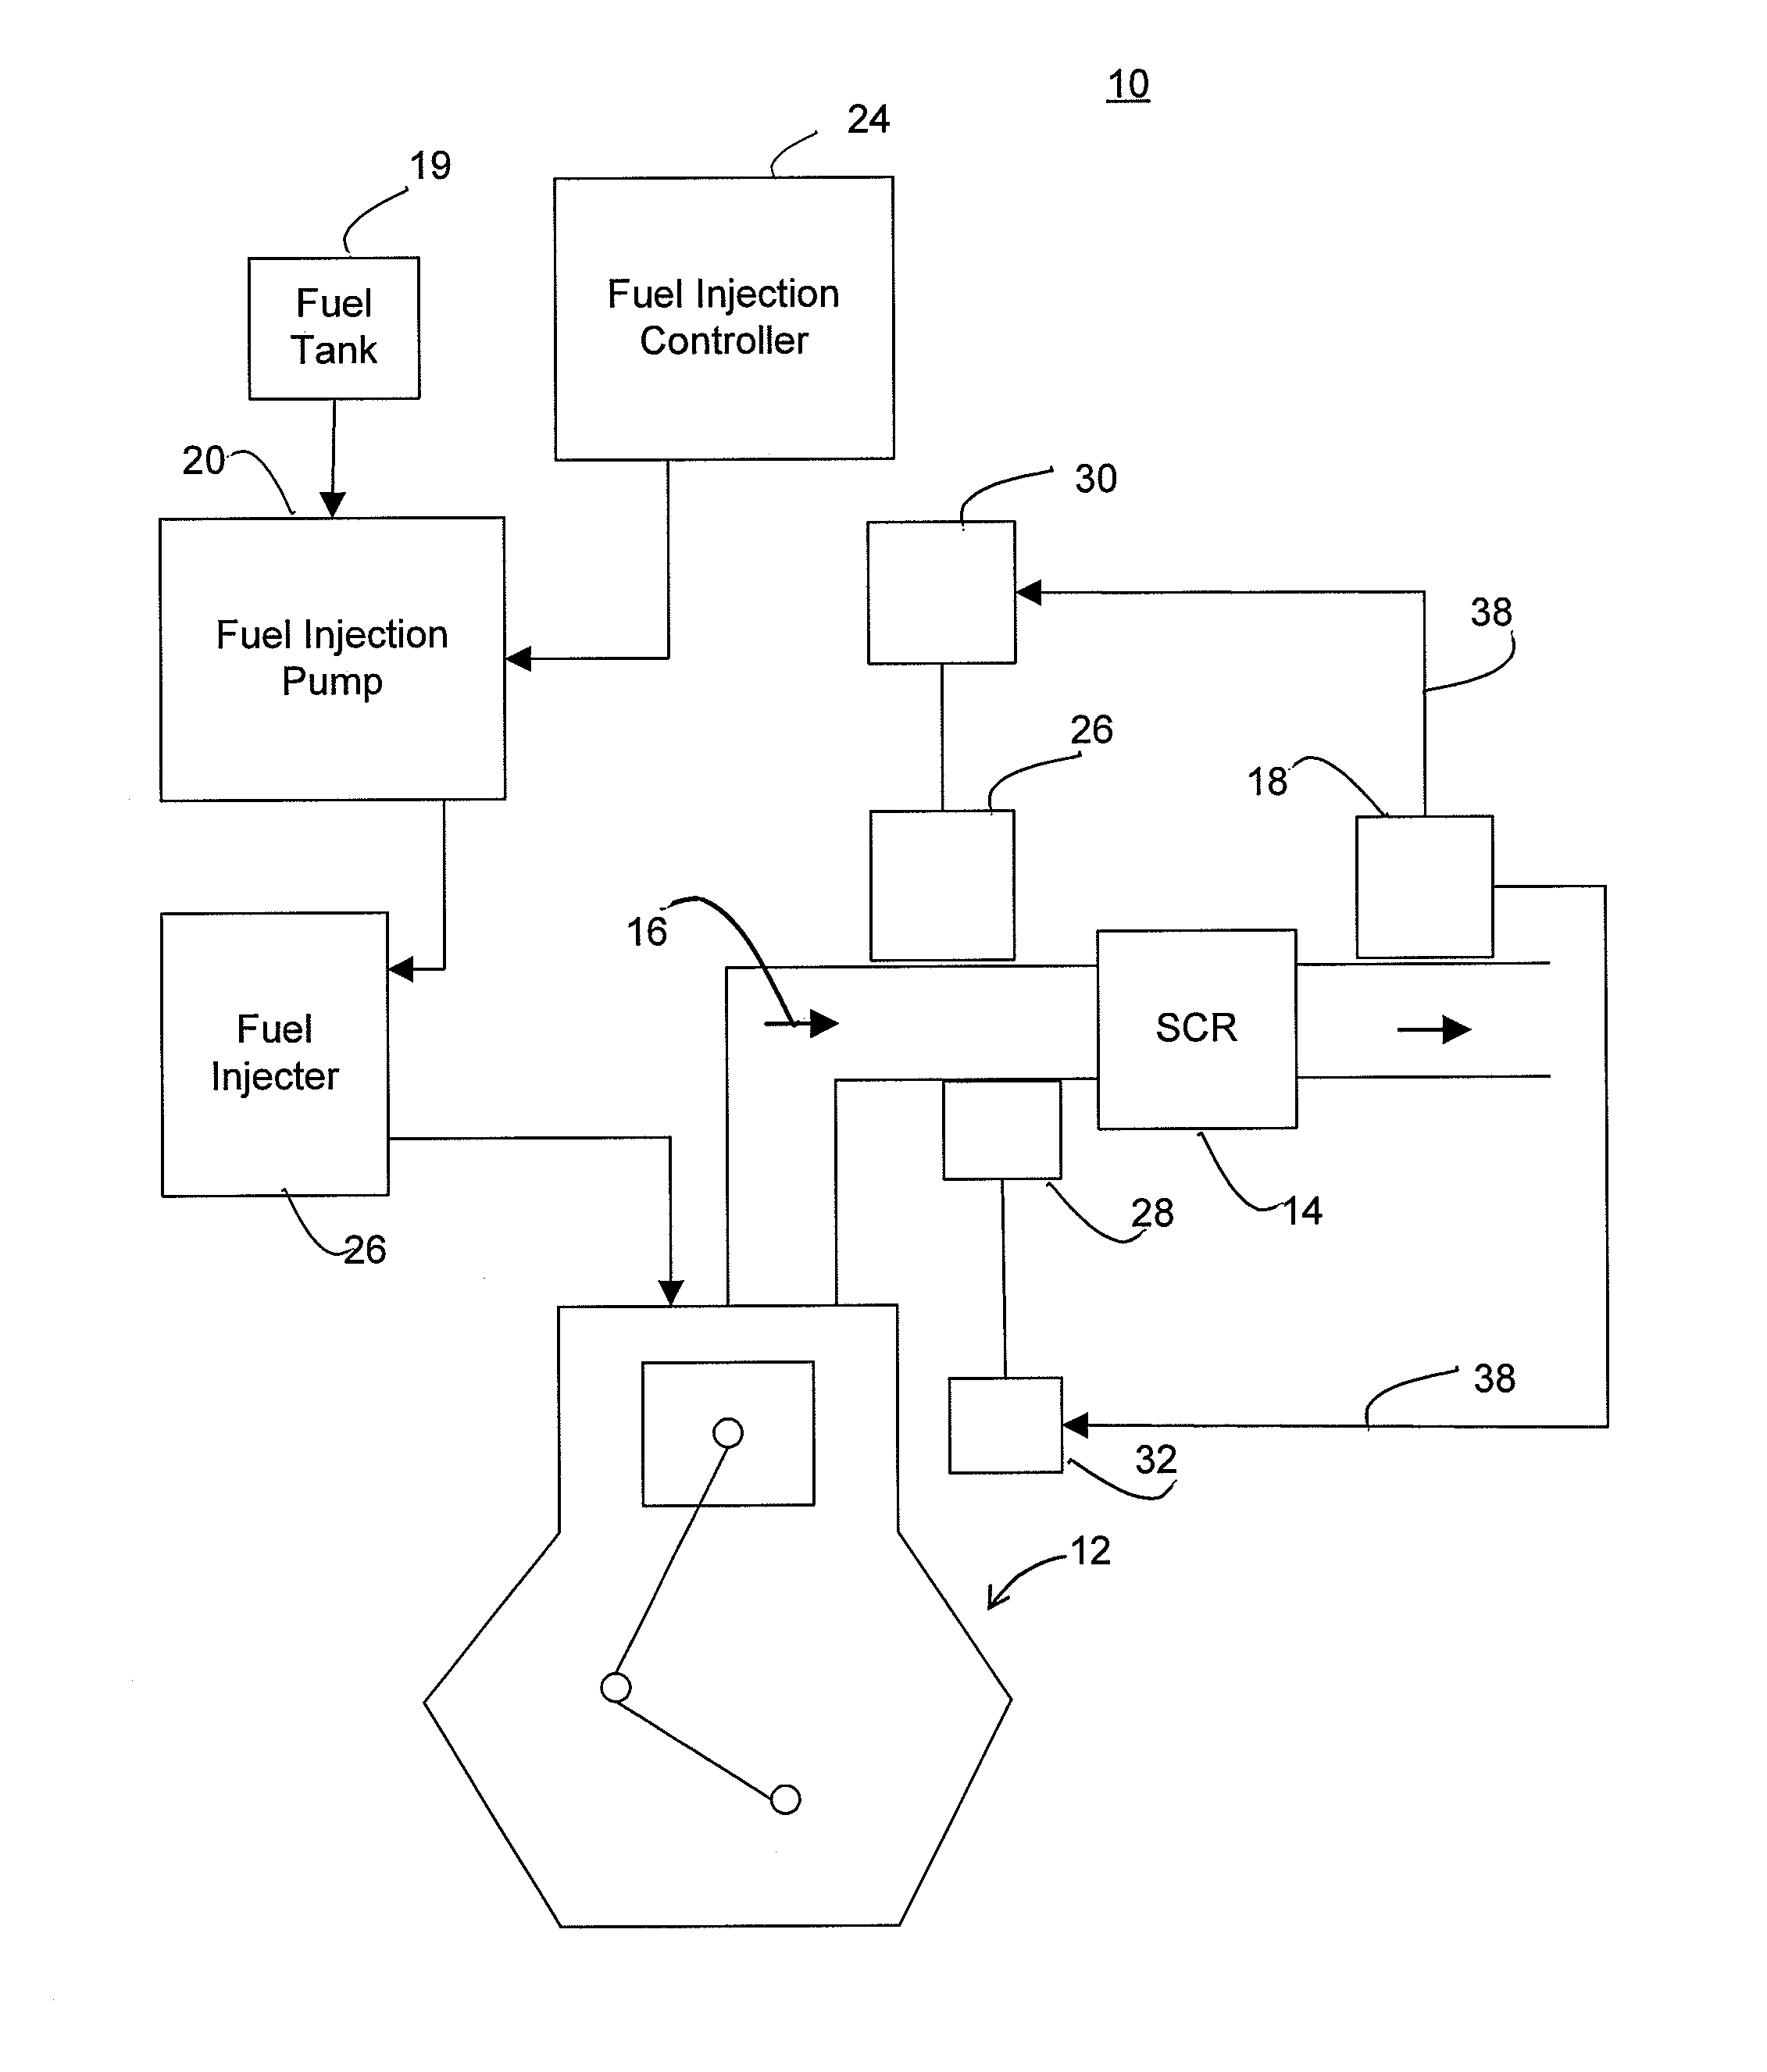 System and Method for Controlling Nitrous Oxide Emissions of an Internal Combustion Engine and Regeneration of an Exhaust Treatment Device